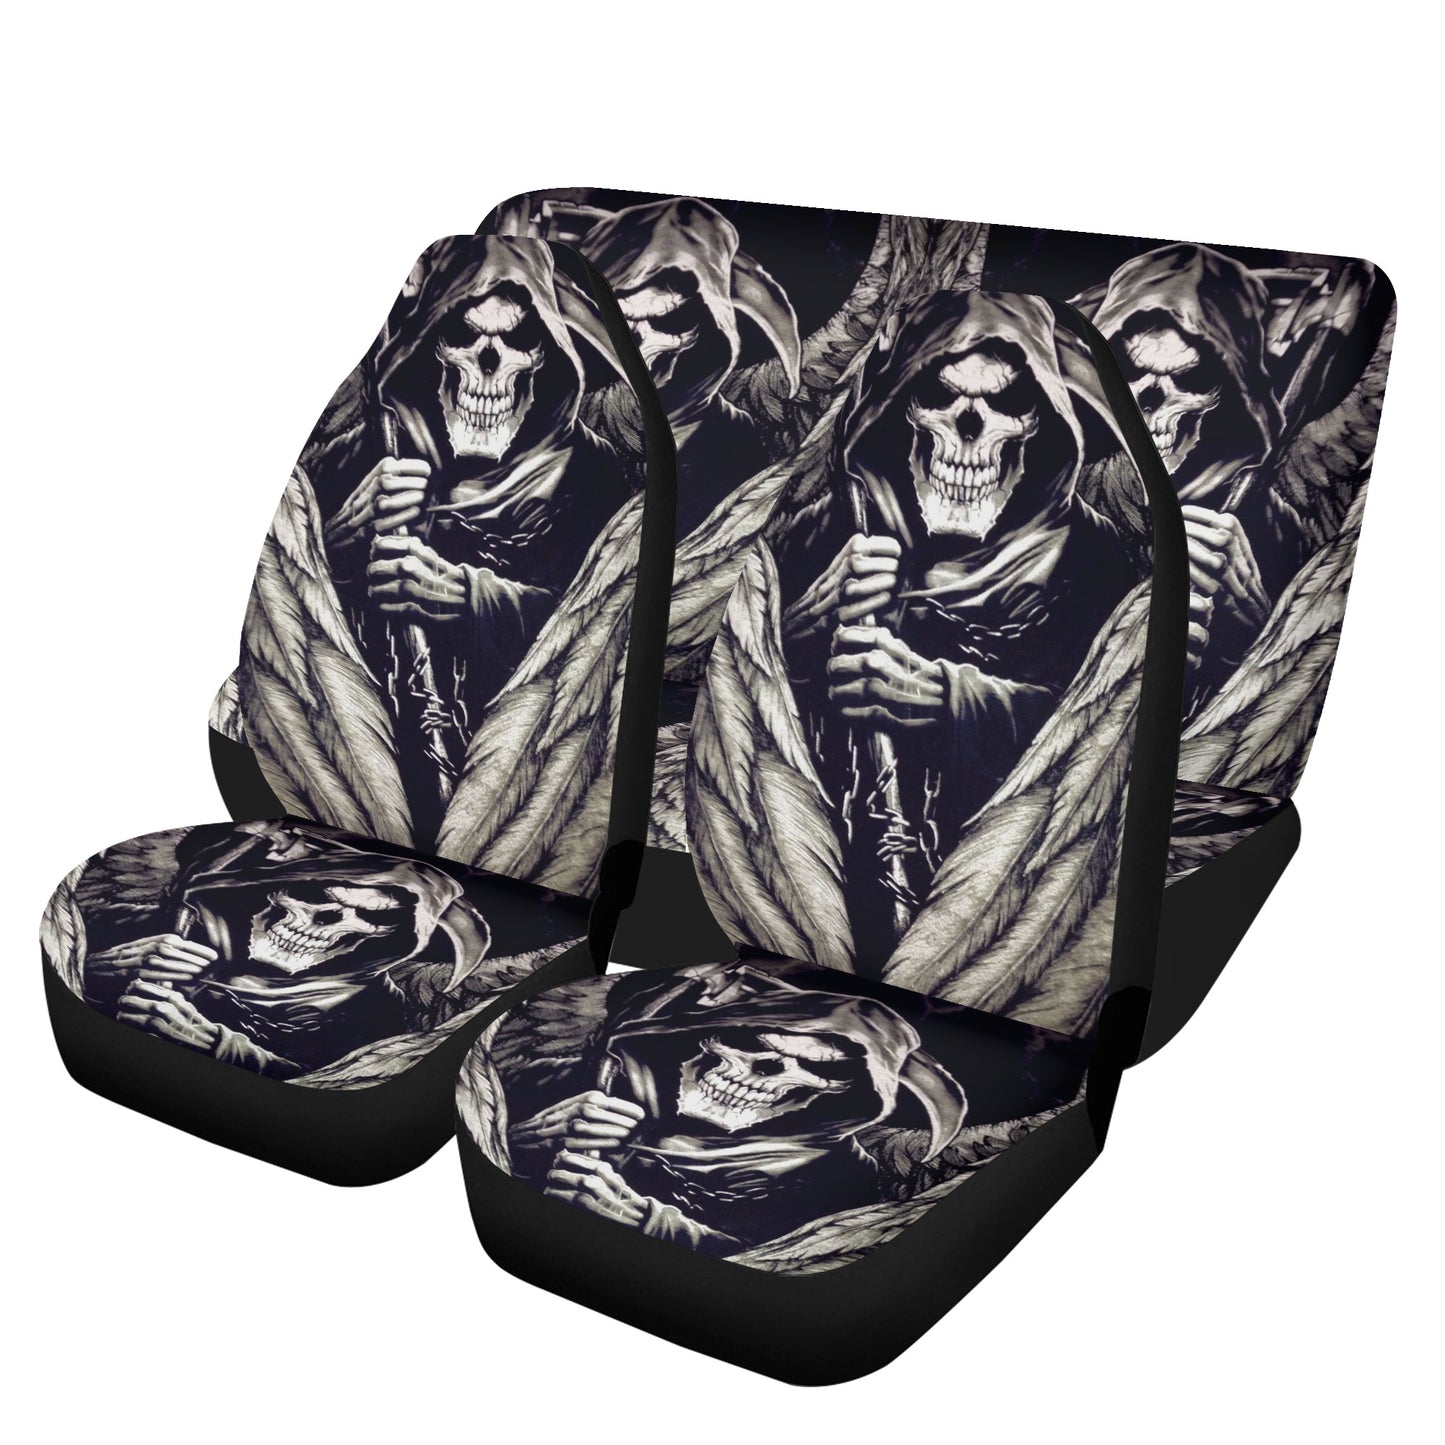 Gothic skull car seat protector, evil car tool, flame skull car tool, gothic skull seat cover for car, grim reaper washable car seat covers,